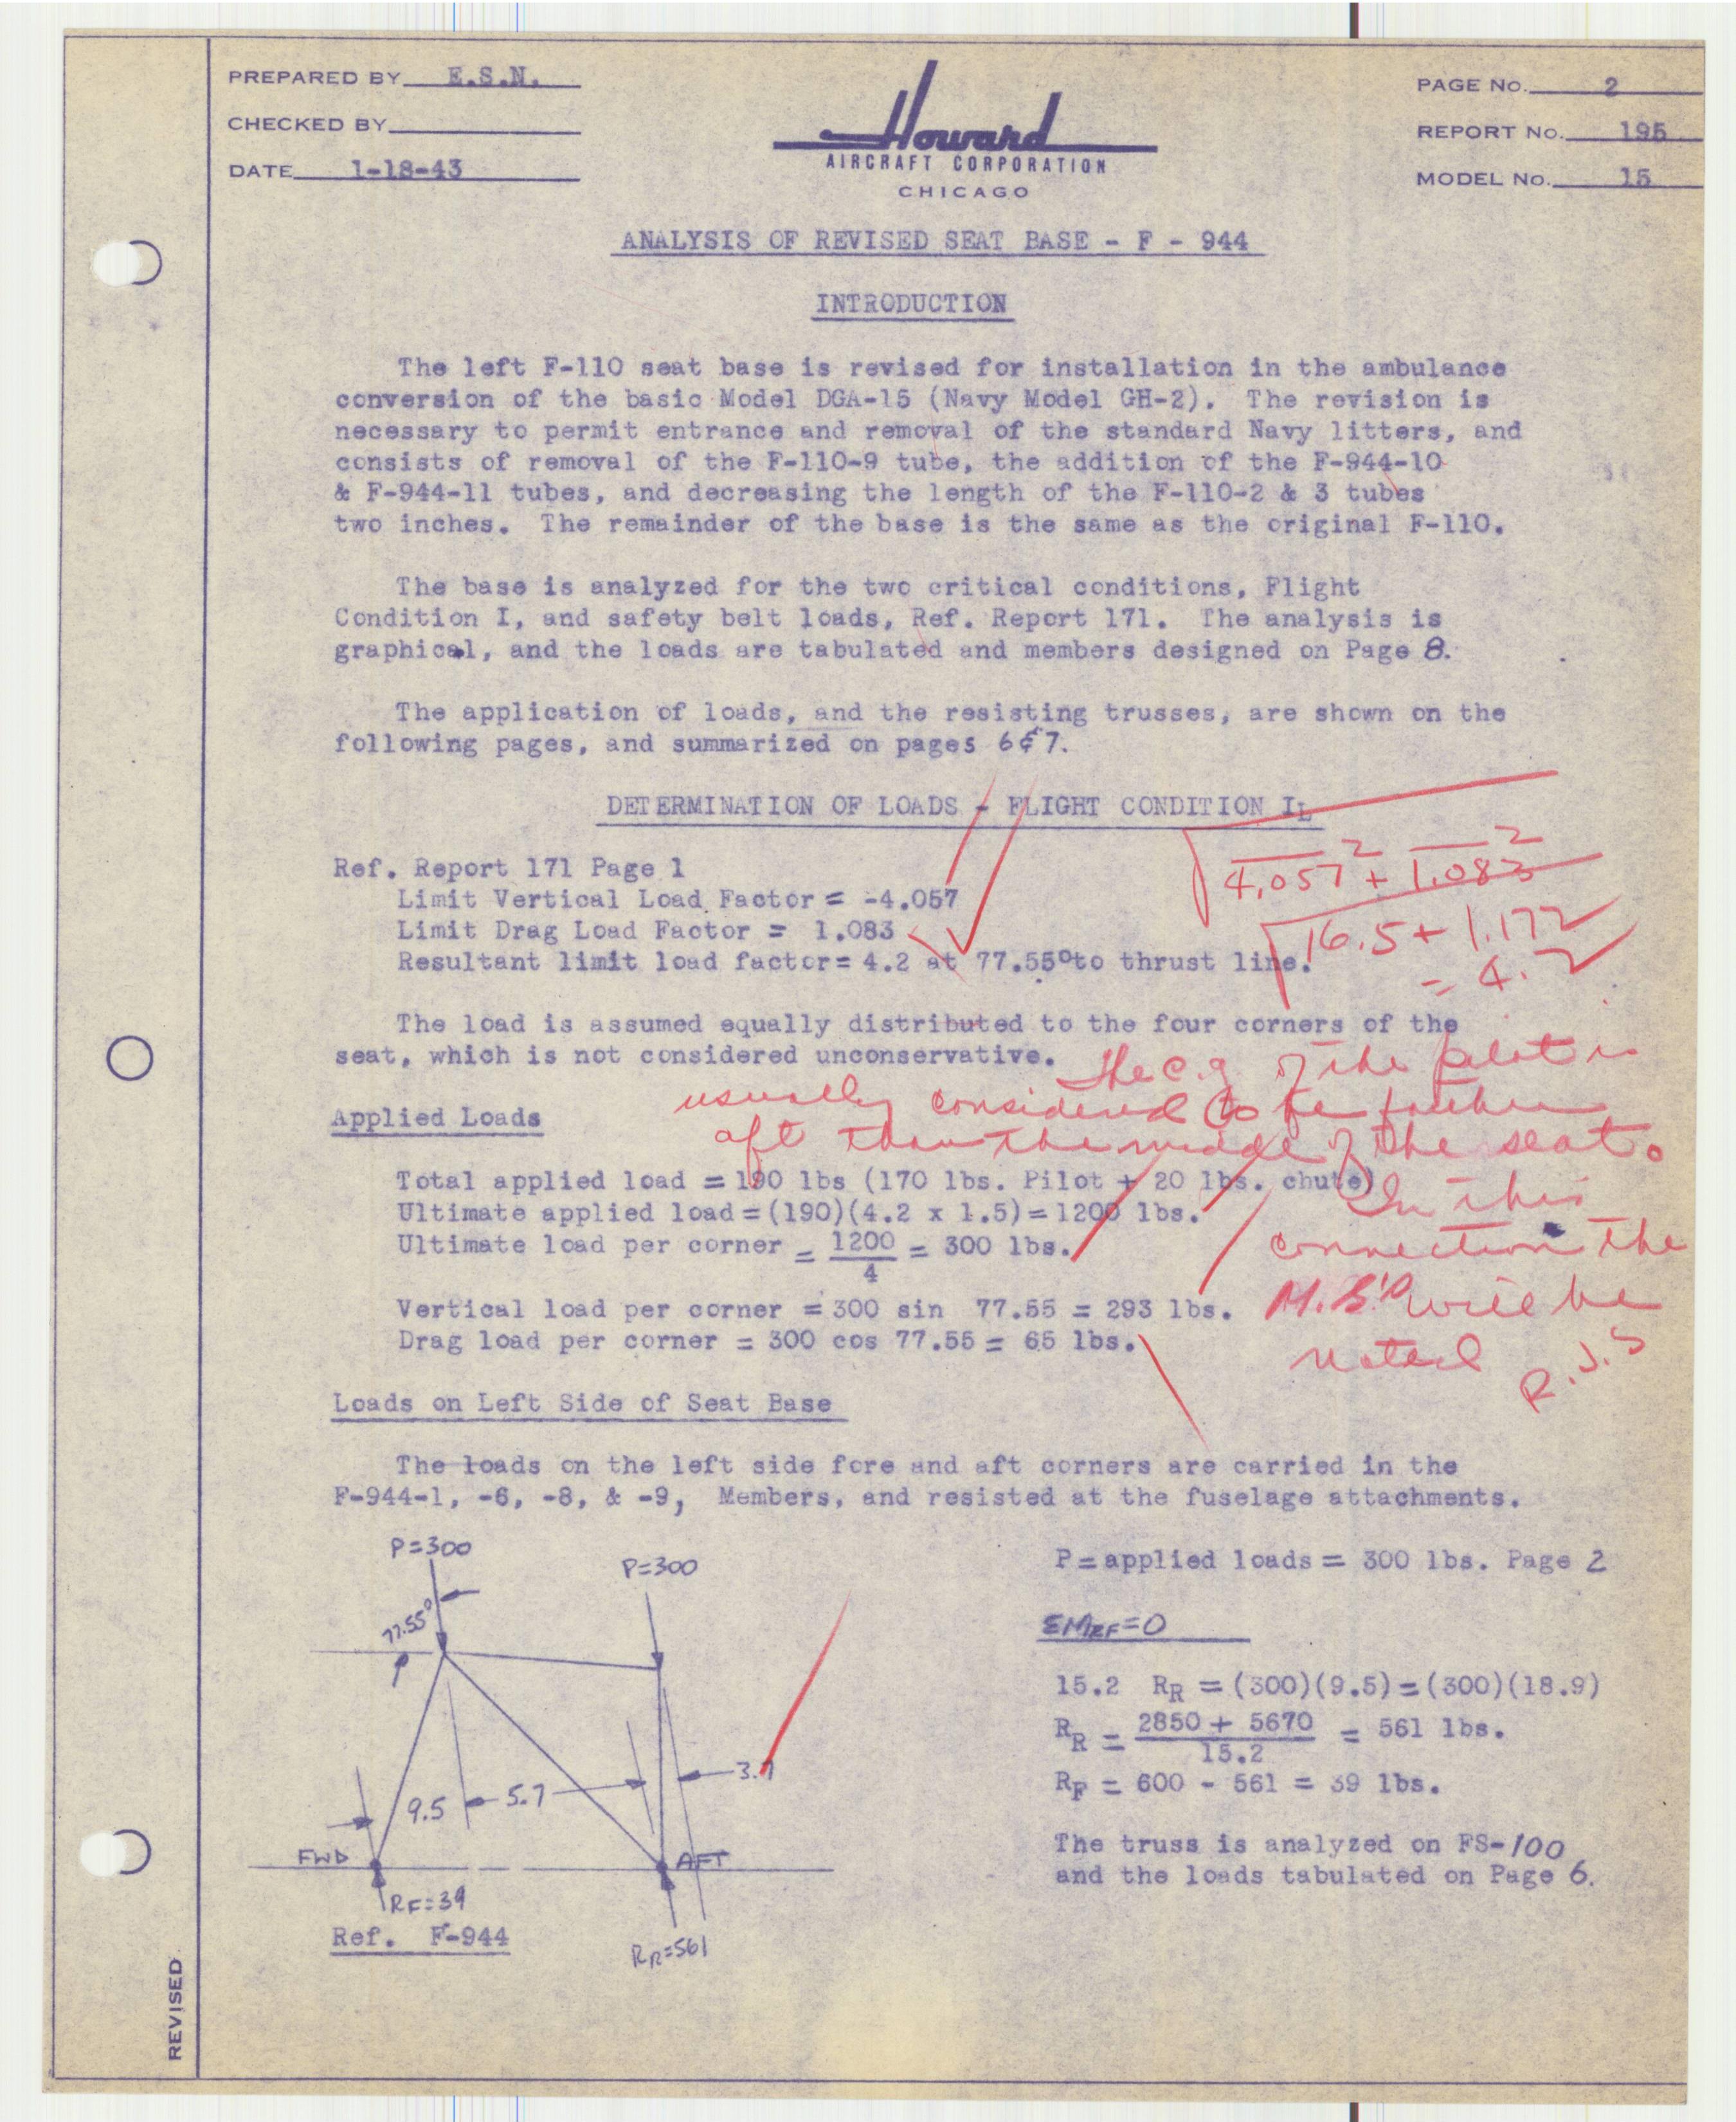 Sample page 3 from AirCorps Library document: Report 195, Analysis of Revised Seat Base, DGA-15